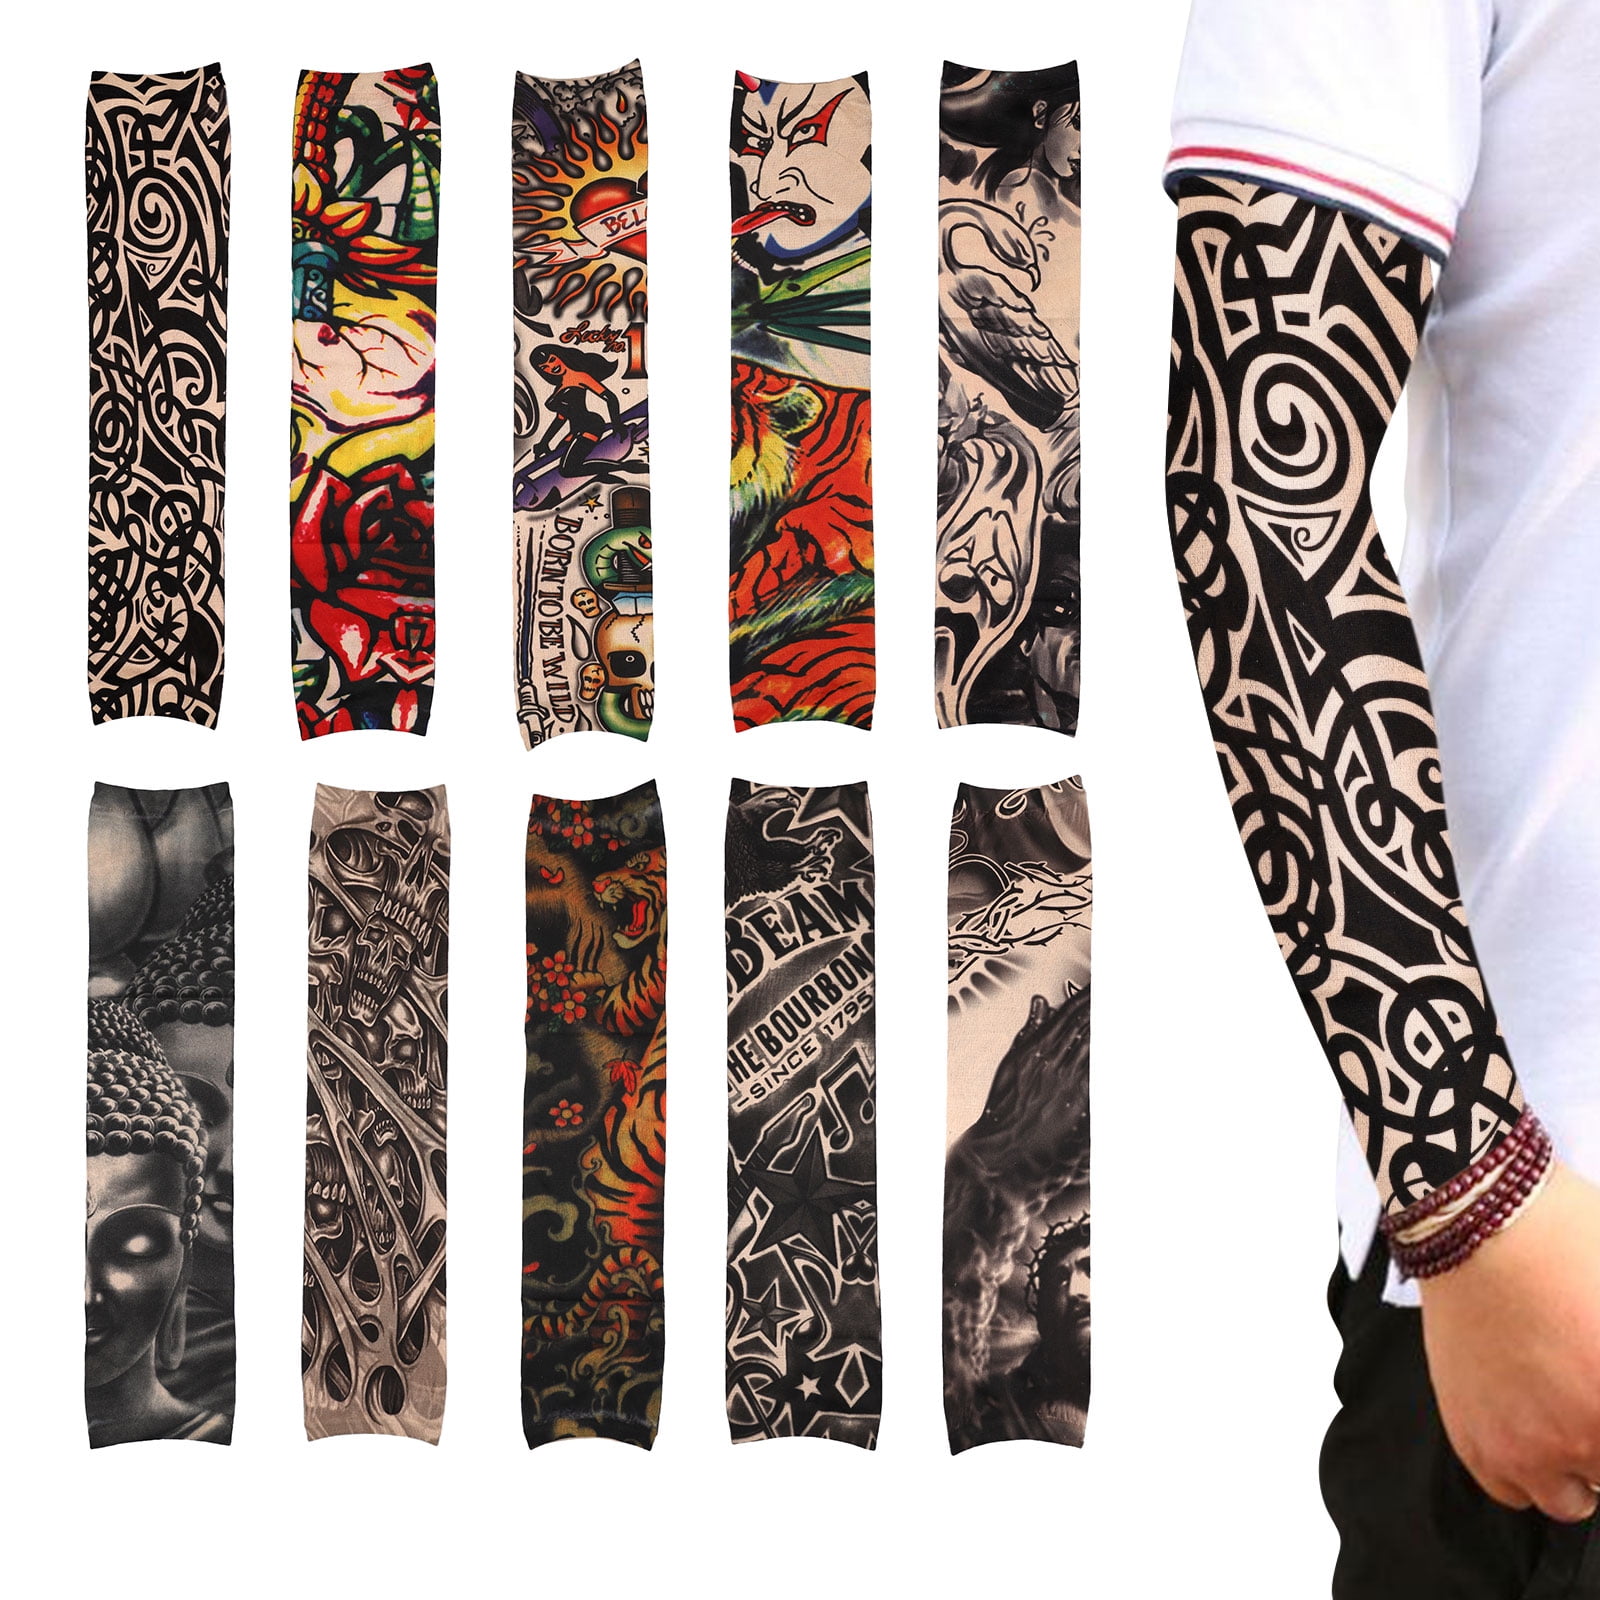 Arm Sleeves Oil Painting Galaxy Wolf Mens Sun UV Protection Sleeves Arm Warmers Cool Long Set Covers